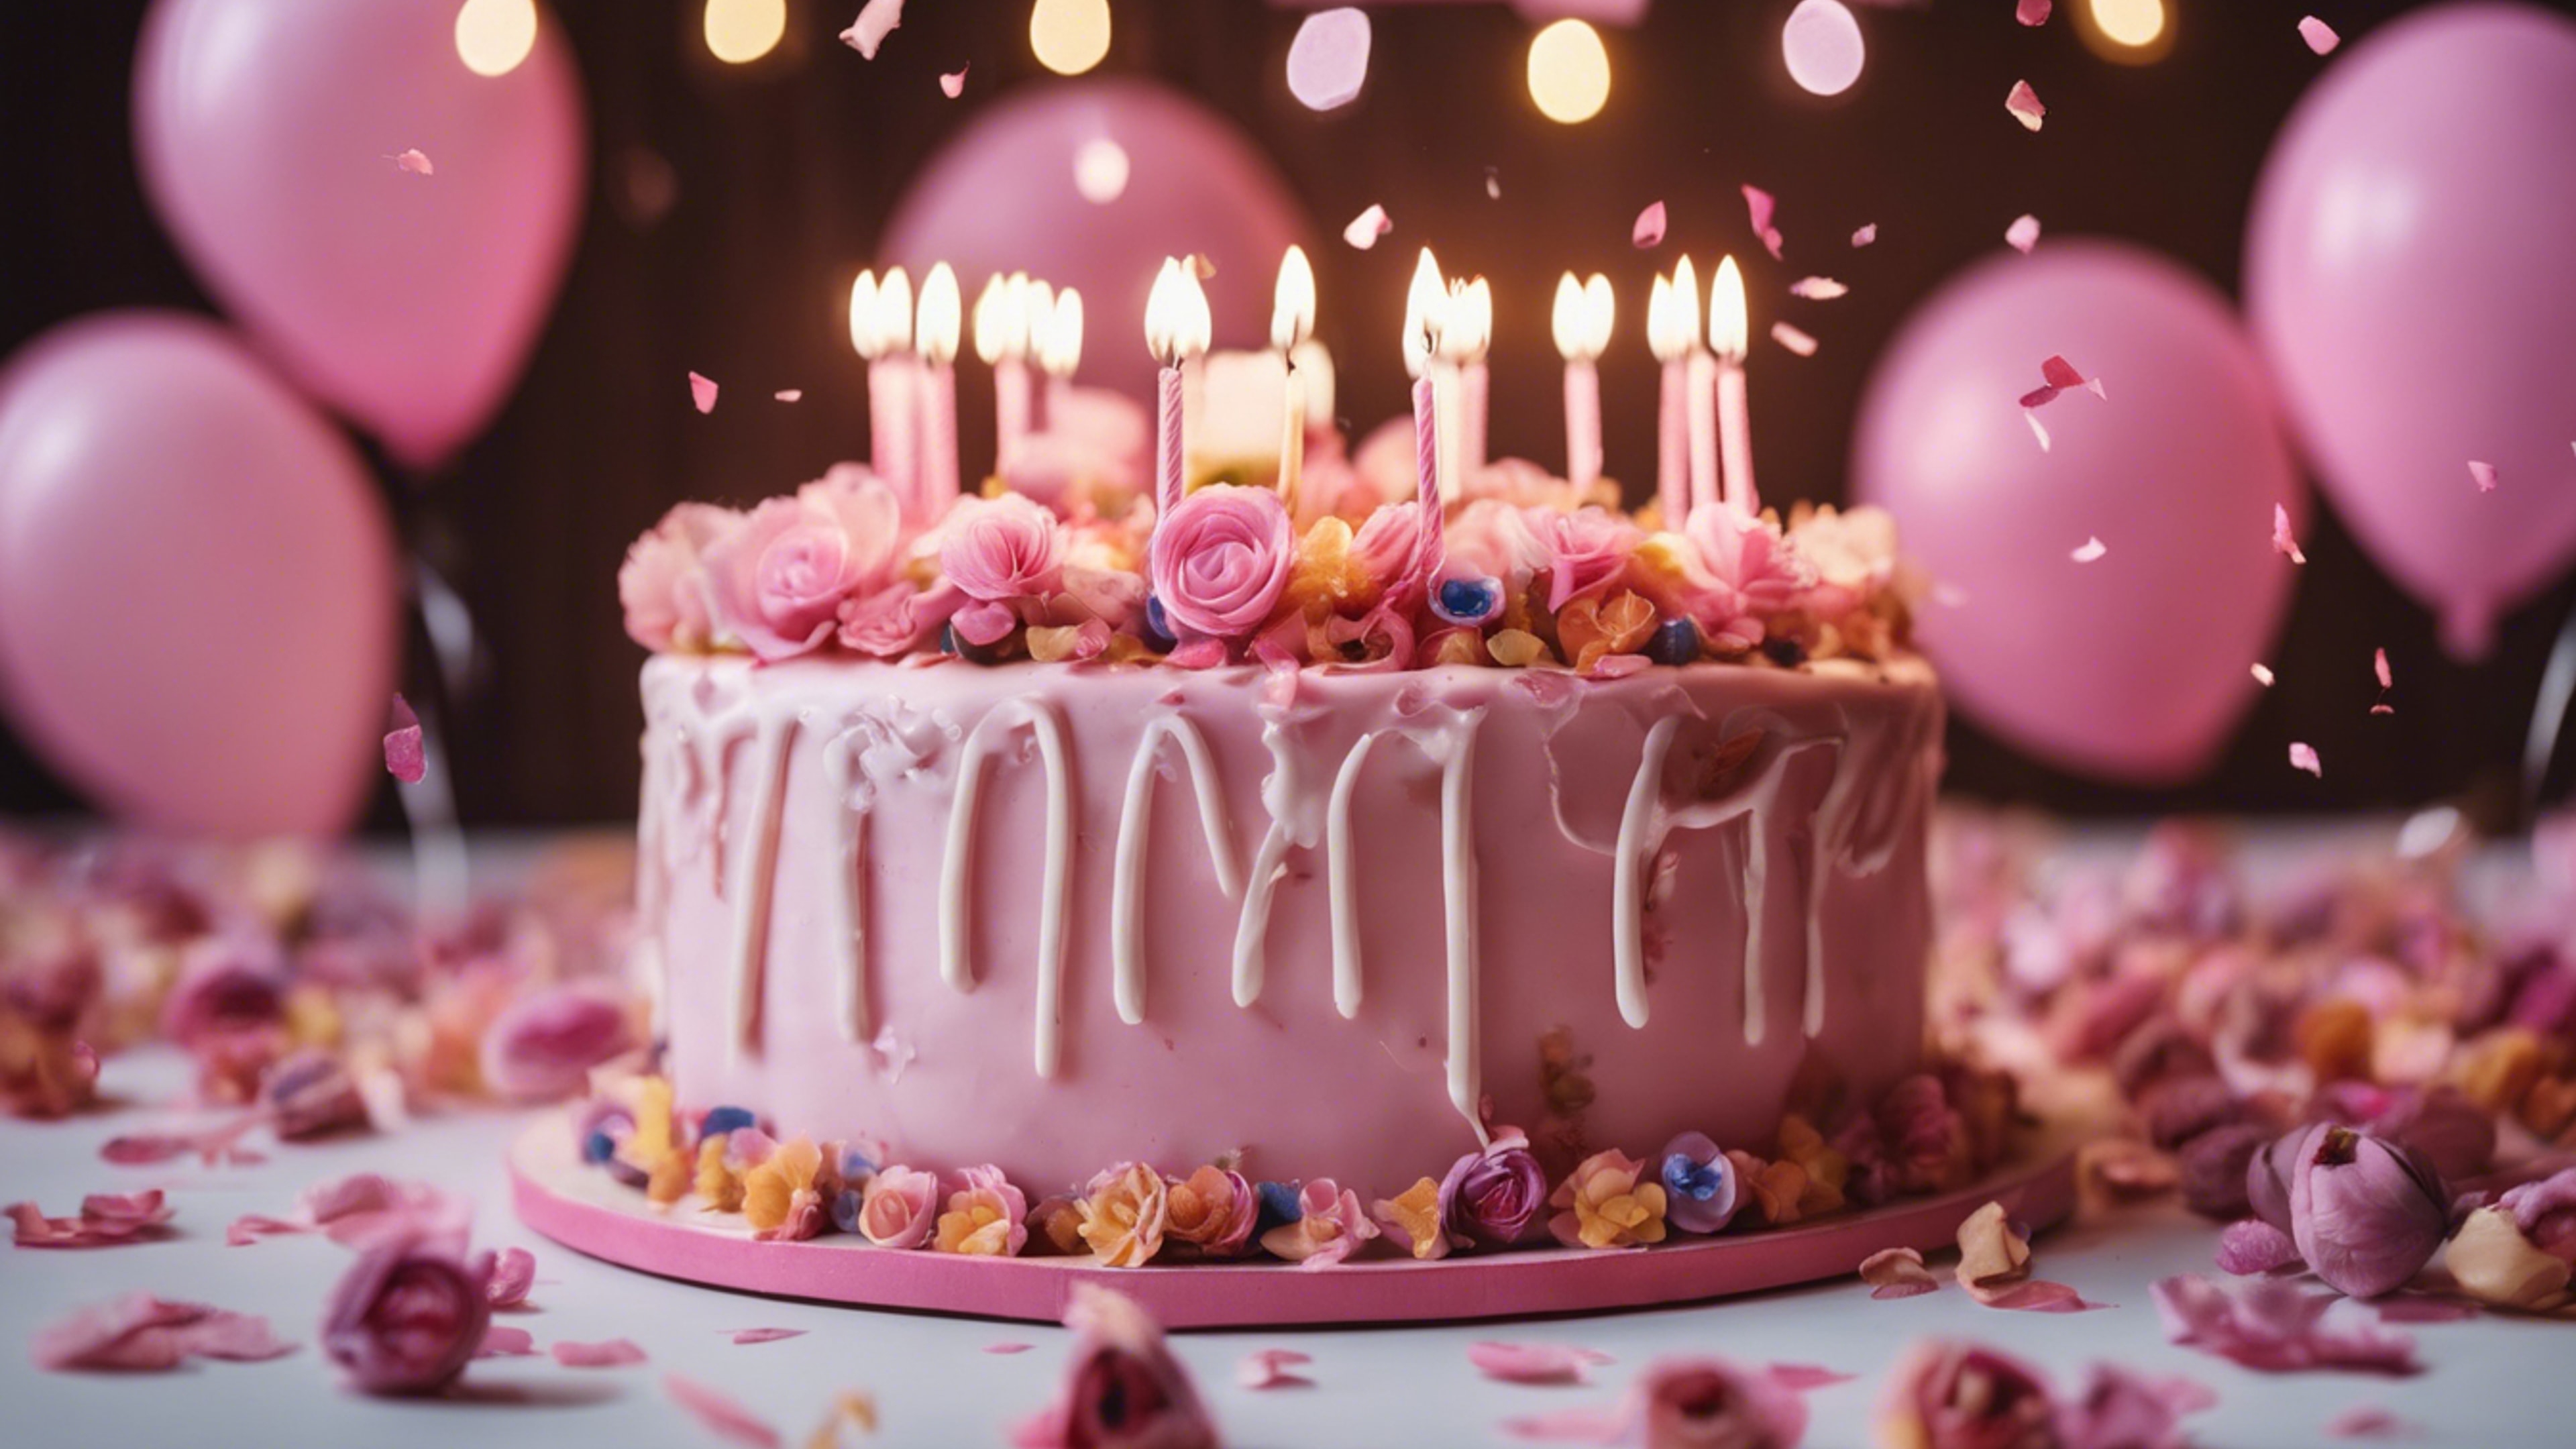 A girly birthday party with pink balloons, confetti, and a big cake decorated with edible flowers. 牆紙[43e1da28e36740768483]